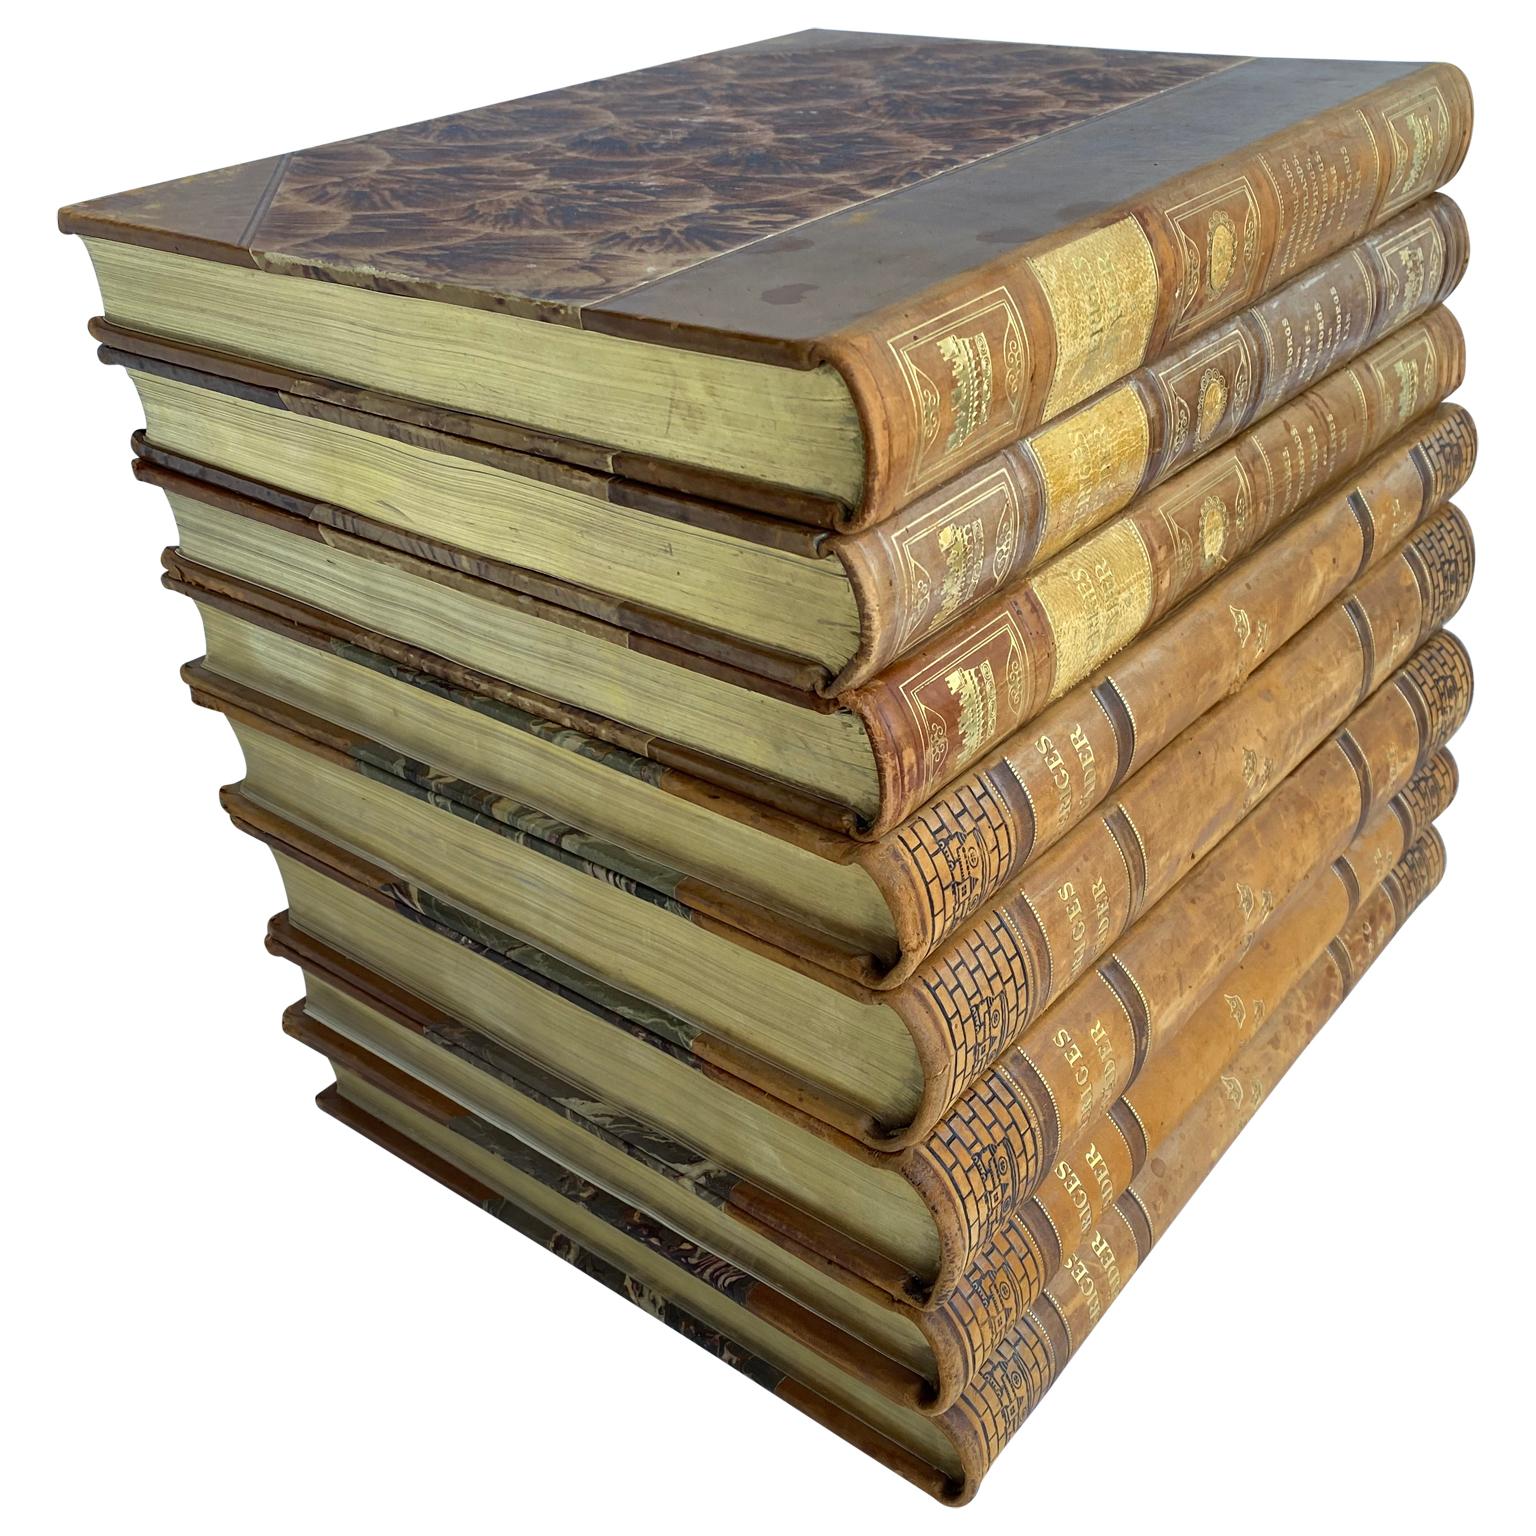 A collection of 8 tall and larger size decorative Swedish leather-bound books from the 1950s. This set consist of 3 plus 5 books describing Swedish town in Swedish.